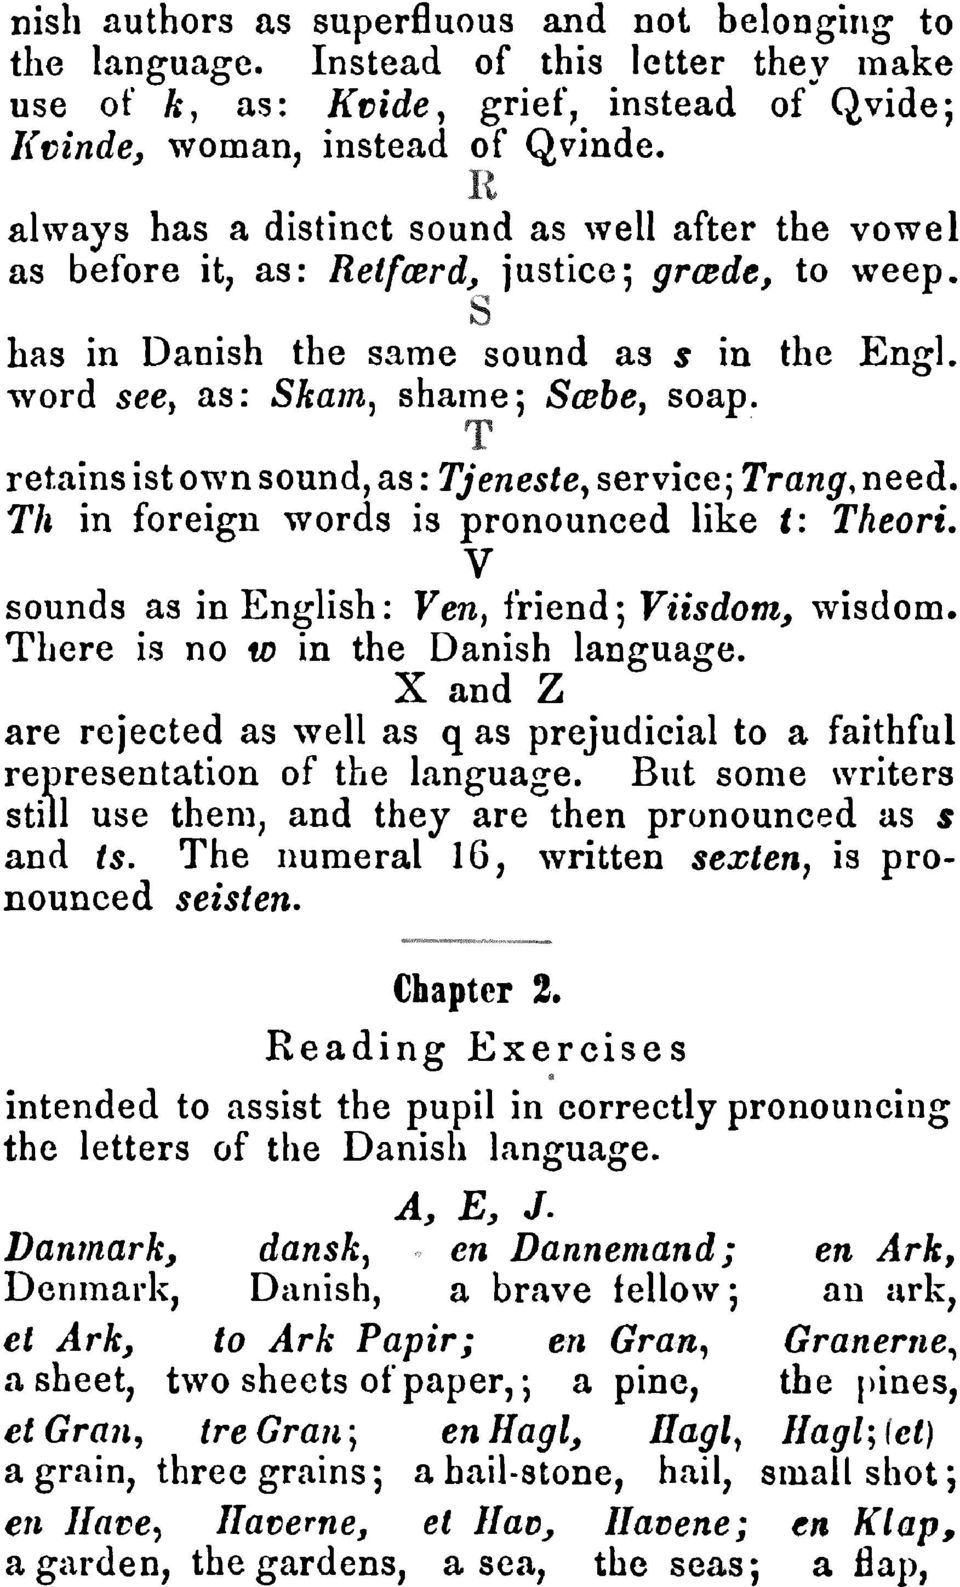 T retins ist own sound, s : Tjeste șervice;trng, need. Th in foreign words is pronounced like /: Theori, sounds s in English : F, frid ; Viisdom, wisdom. There is no to in Dnish lnguge.